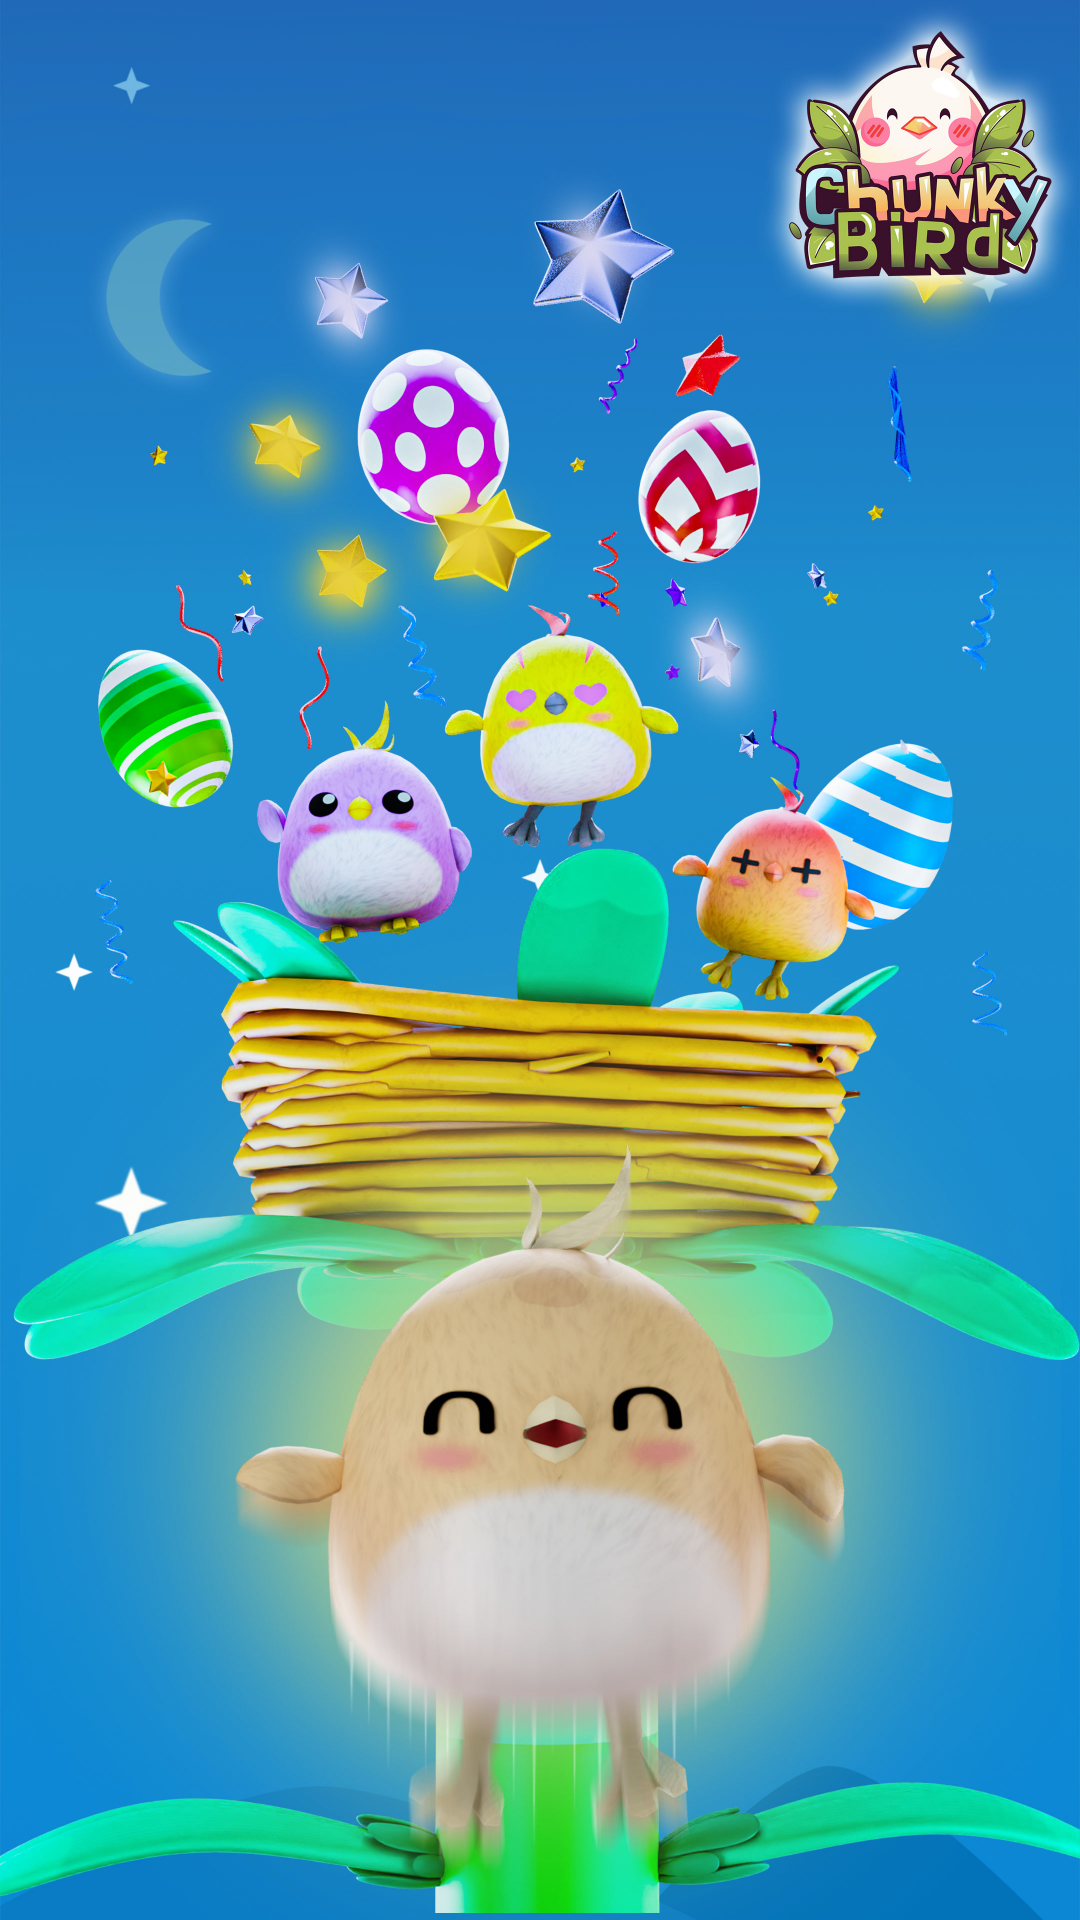 A screenshot of the ChunkyBird displaying the level completion with bird happily dancing under the nest full of colorful eggs